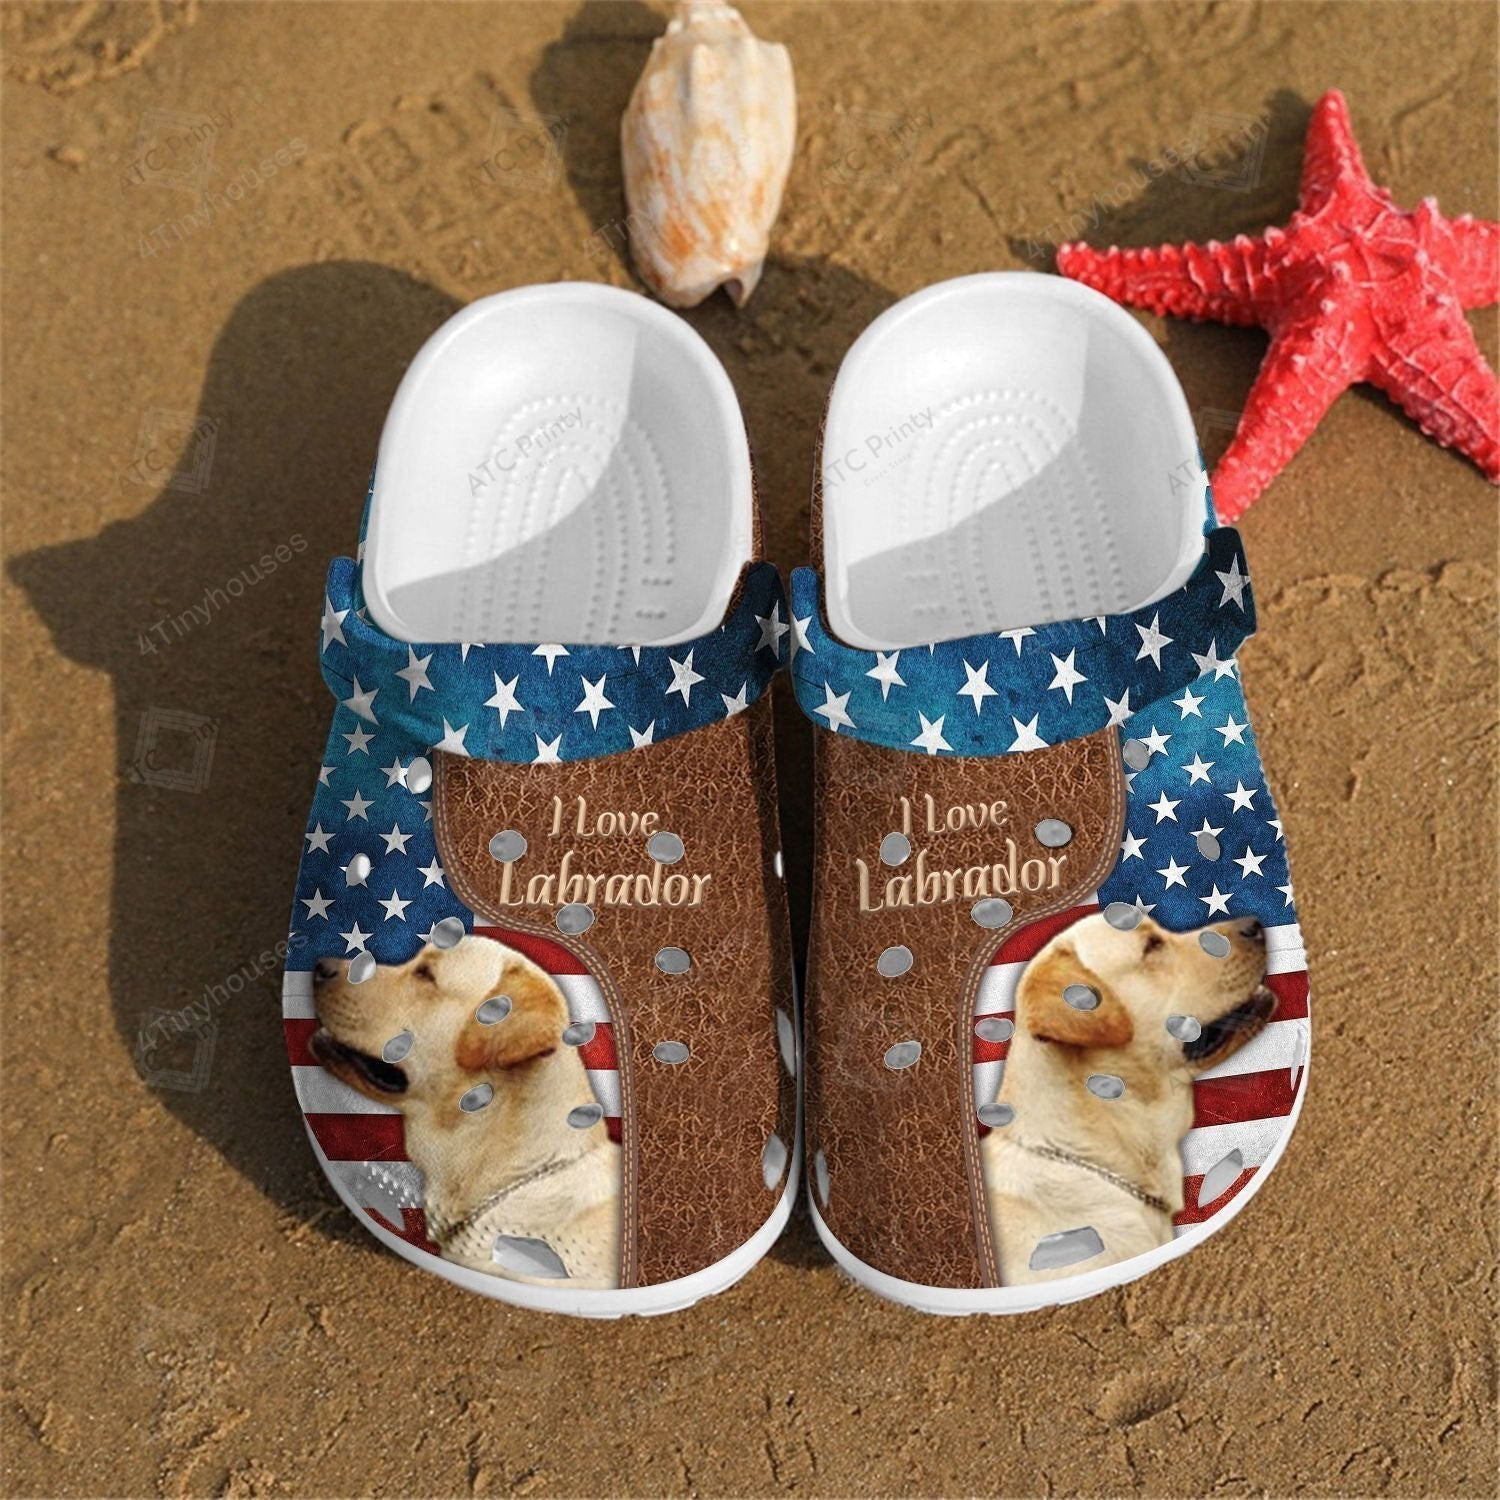 Love Labrador Usa Shoes - 4Th Of July America Flag Crocs Clogs Gifts For Children